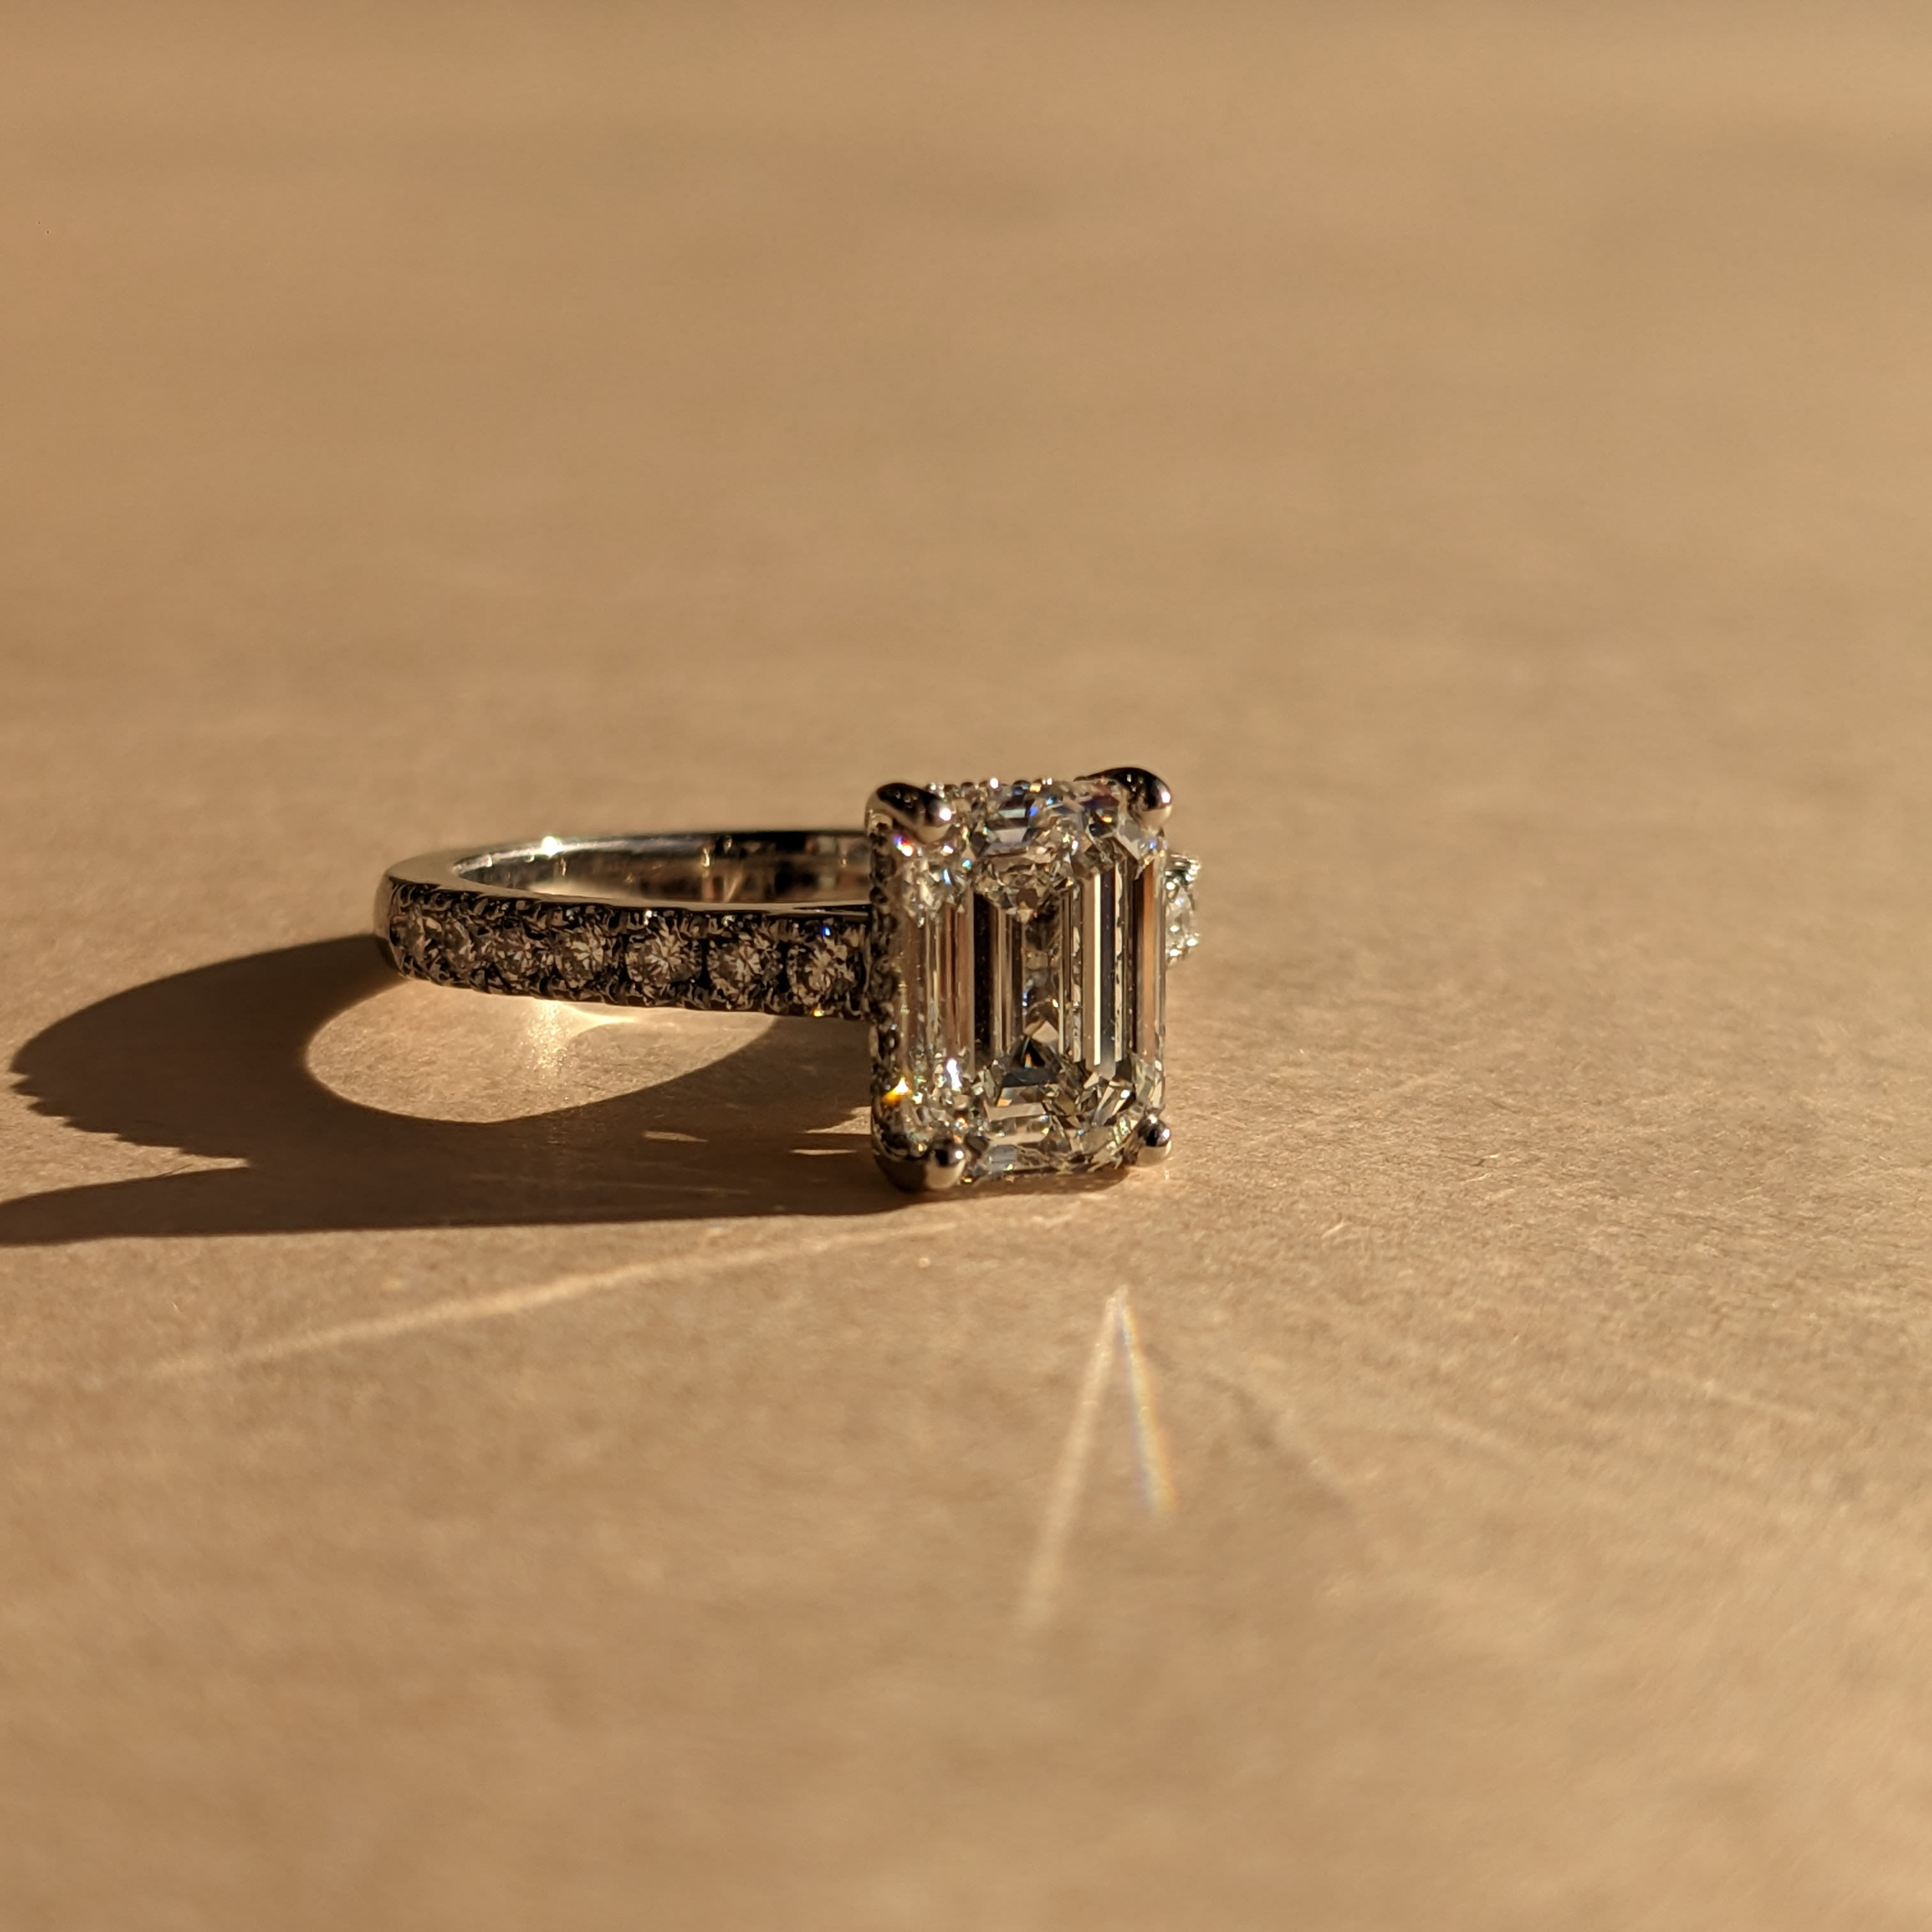 Emerald cut diamond solitaire engagement ring with pave set diamonds half way along the platinum band